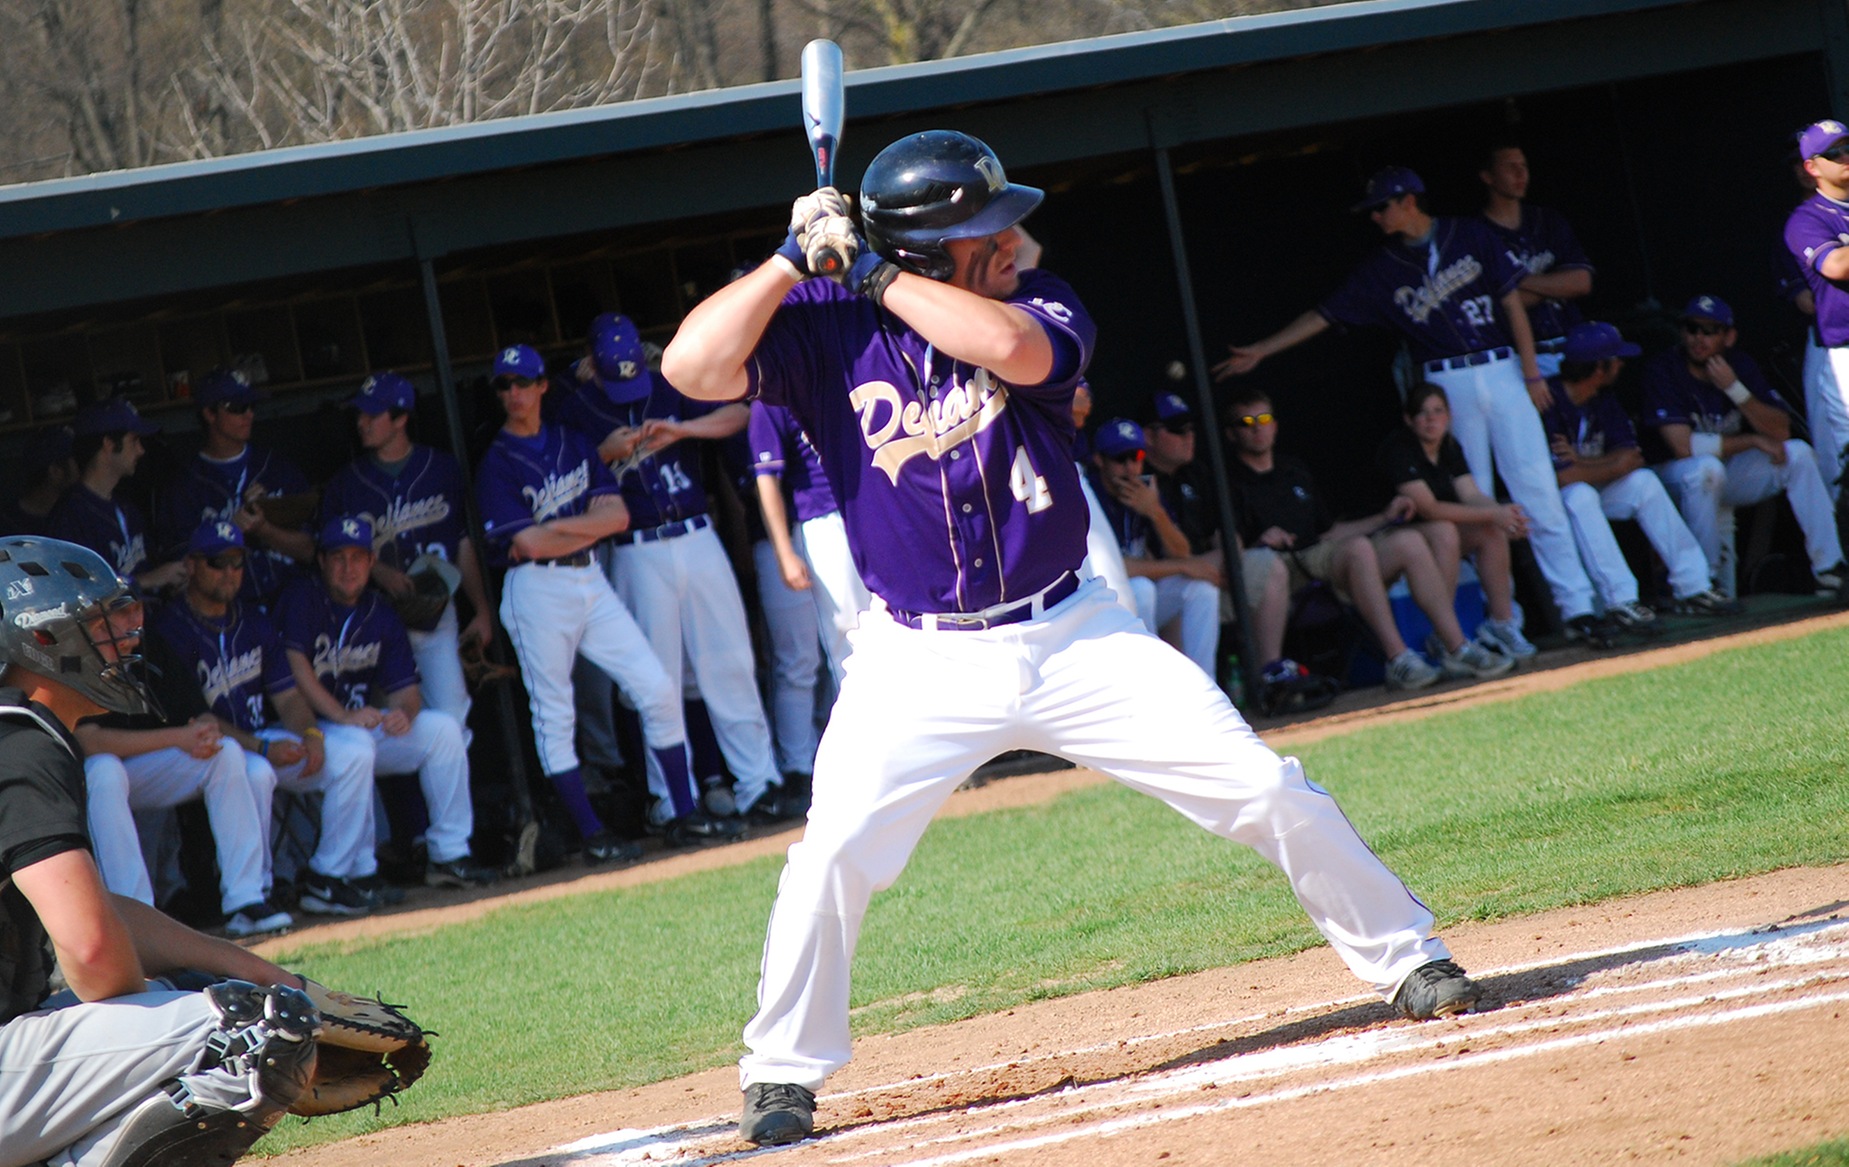 Pitro Ties DC’s All-Time Hit Mark in Loss to No. 3 Heidelberg